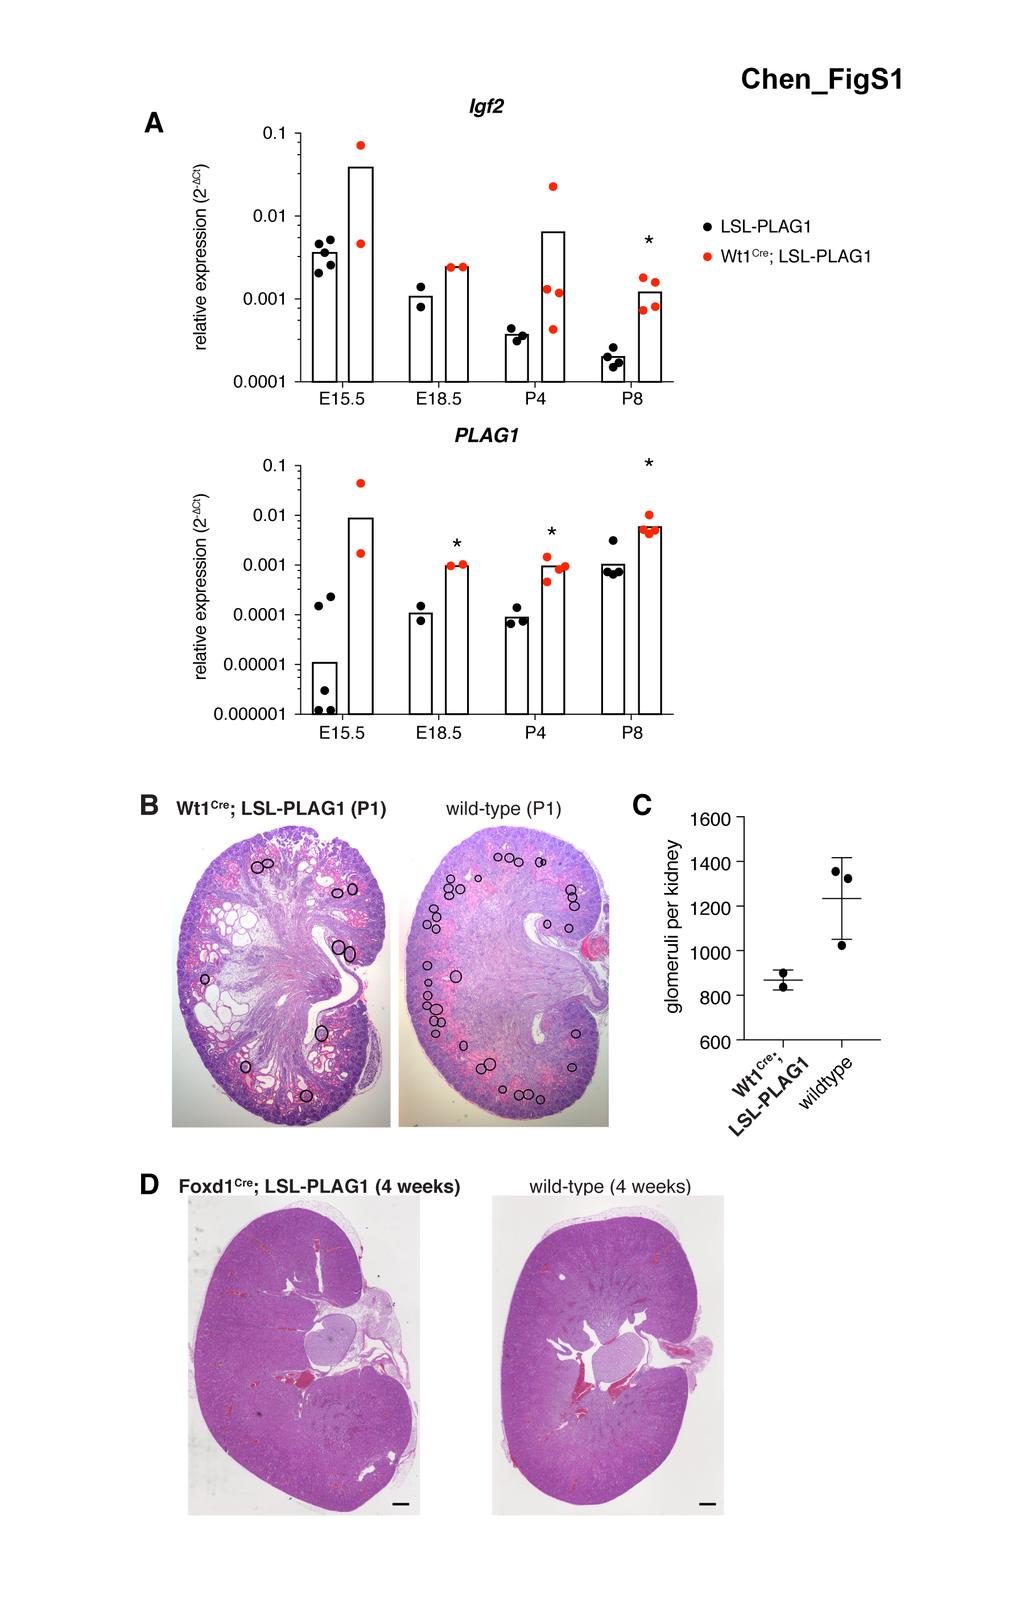 Supplemental Figure S1. PLAG1 kidneys contain fewer glomeruli (A) Quantitative PCR for Igf2 and PLAG1 in whole kidneys taken from mice at E15.5, E18.5, P4, and P8.